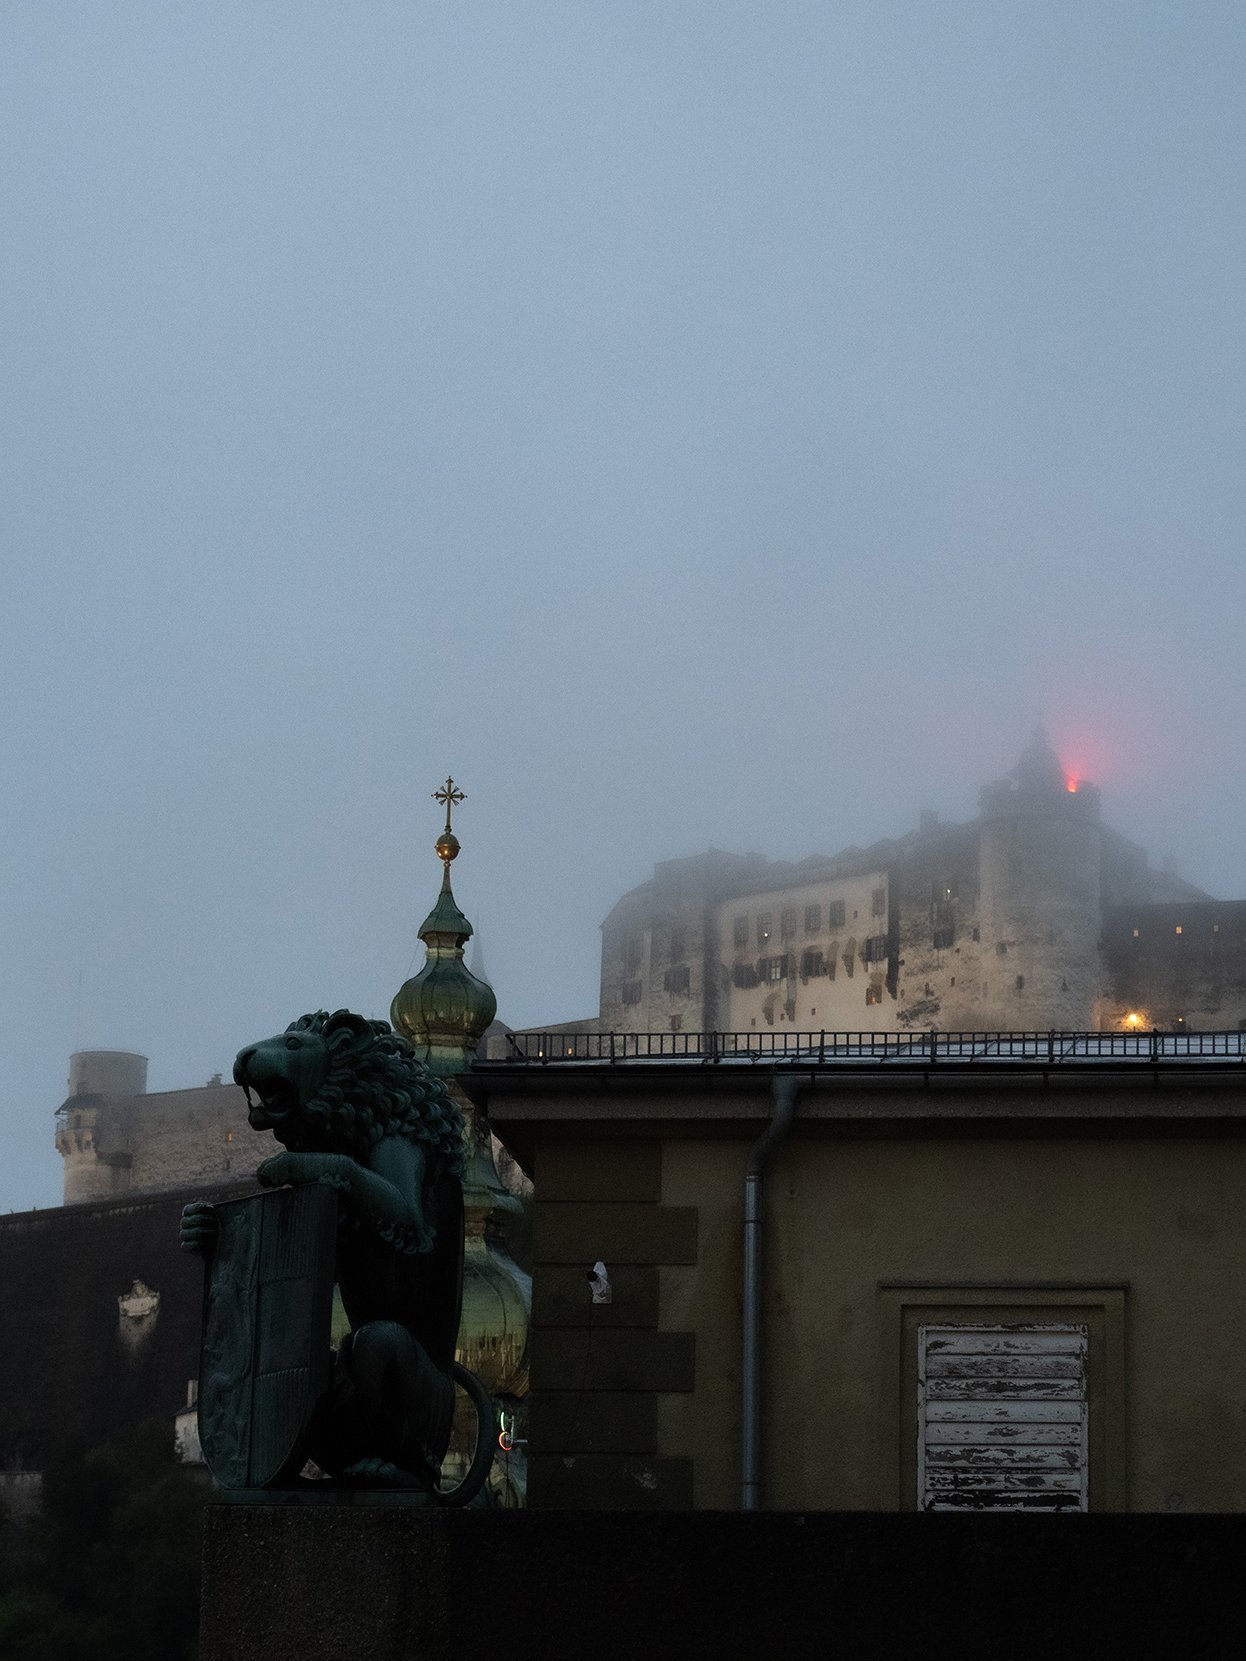 Rainy and foggy view of the city castle